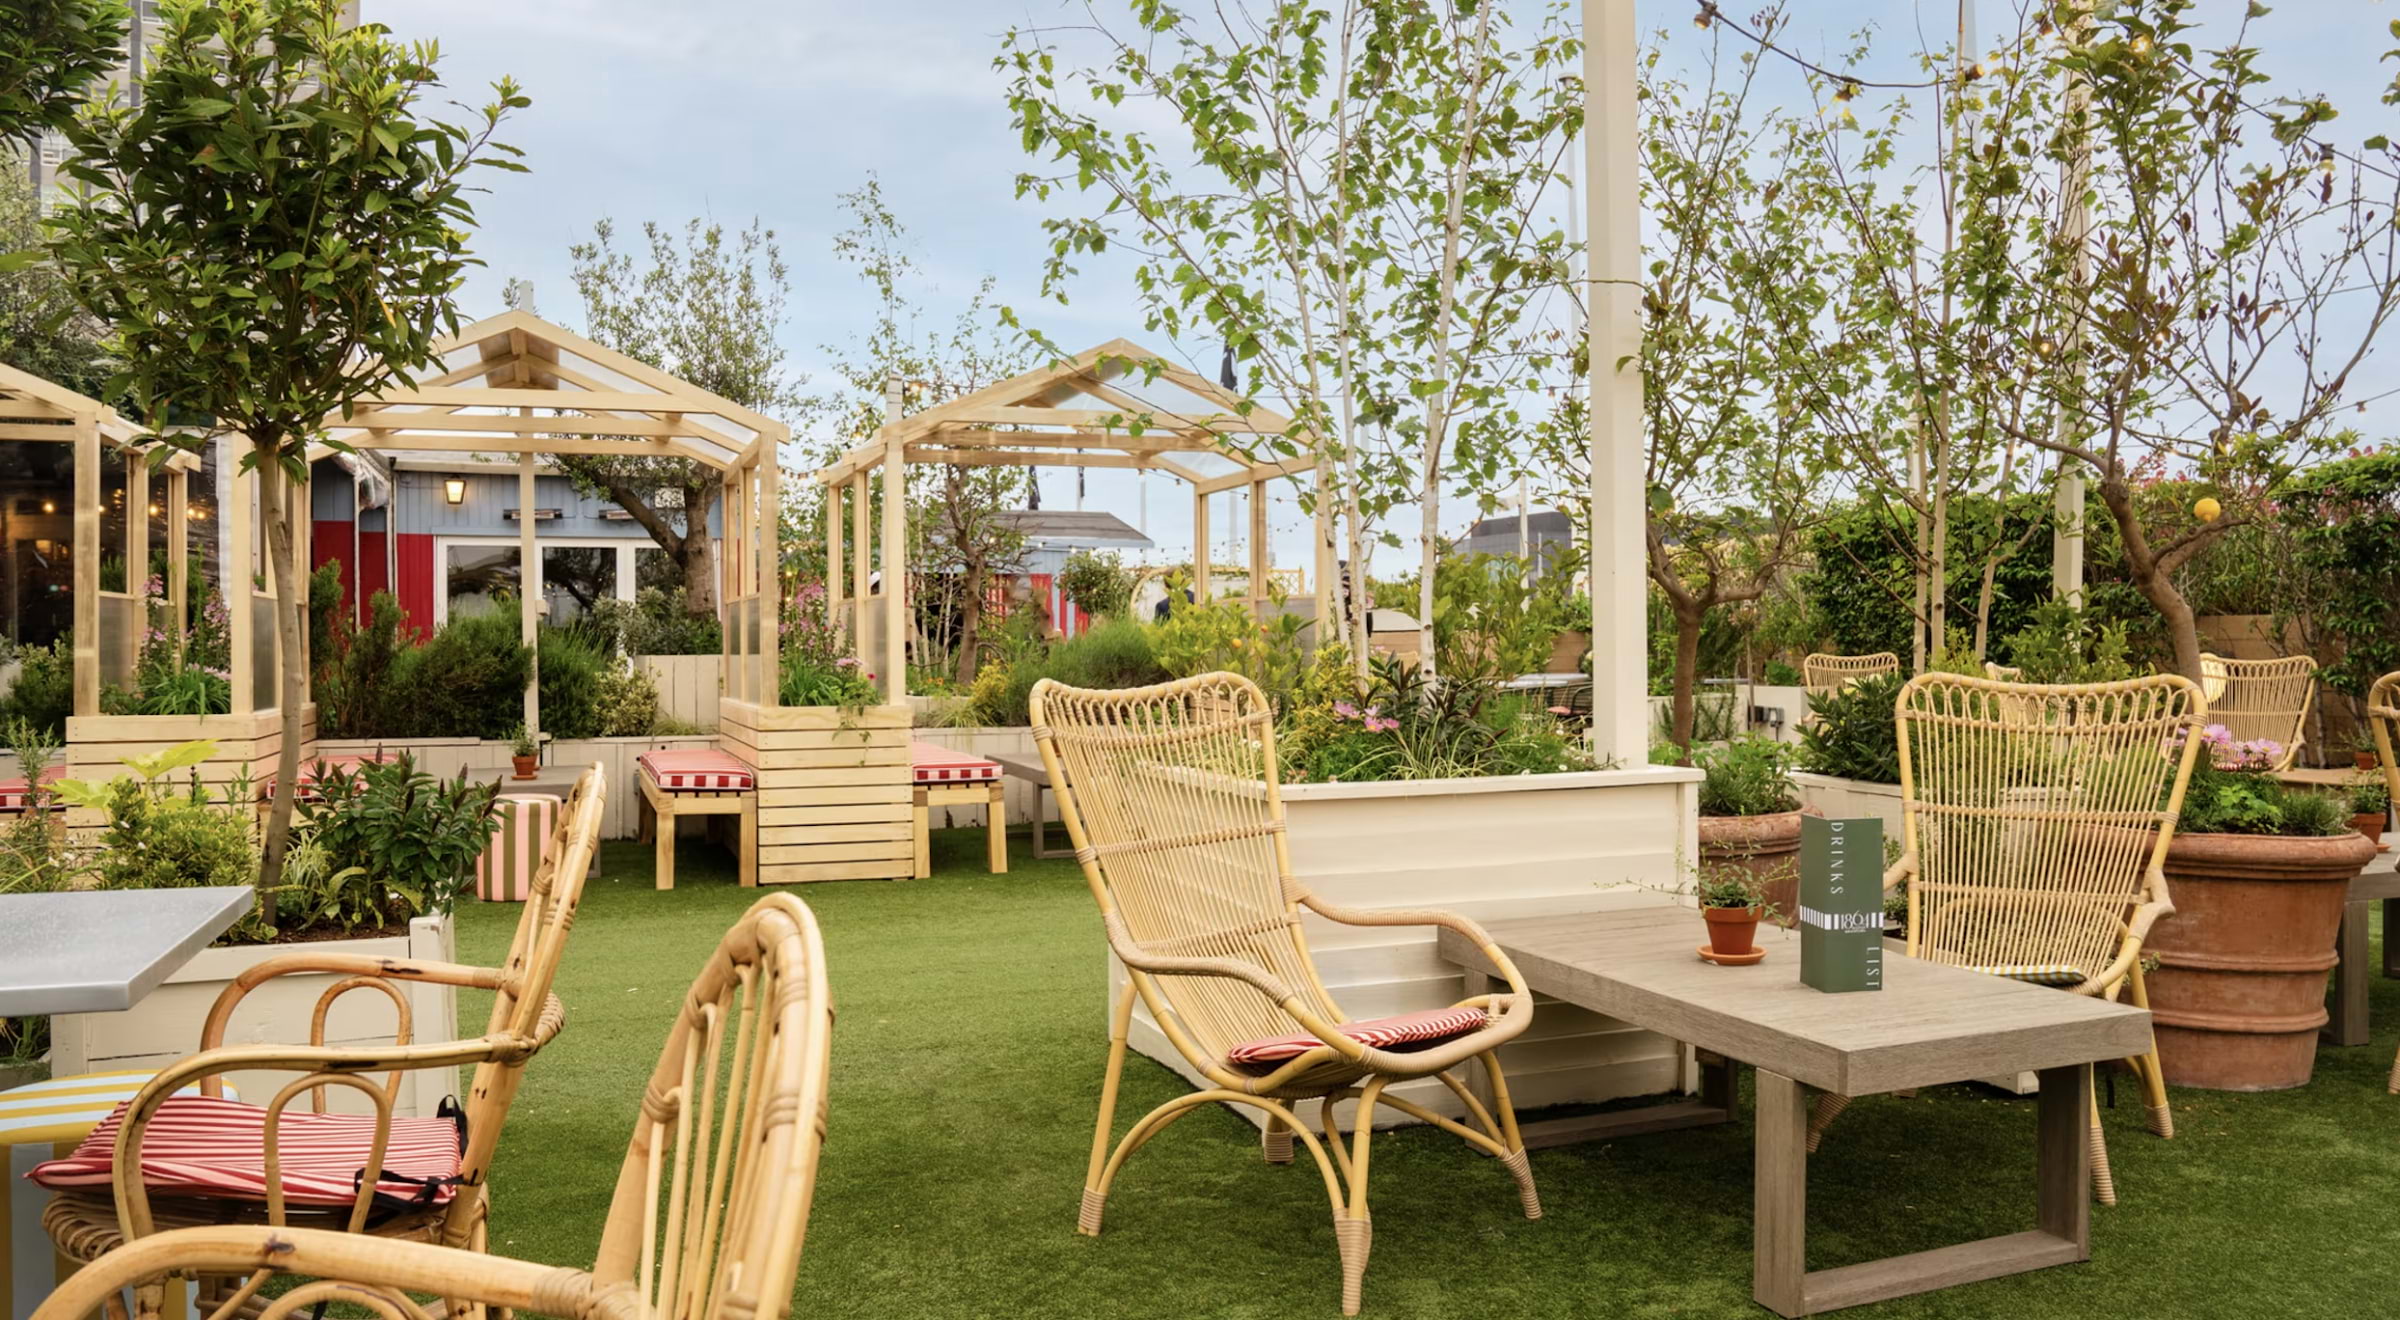 An iconic Oxford Street store has opened a lush rooftop bar